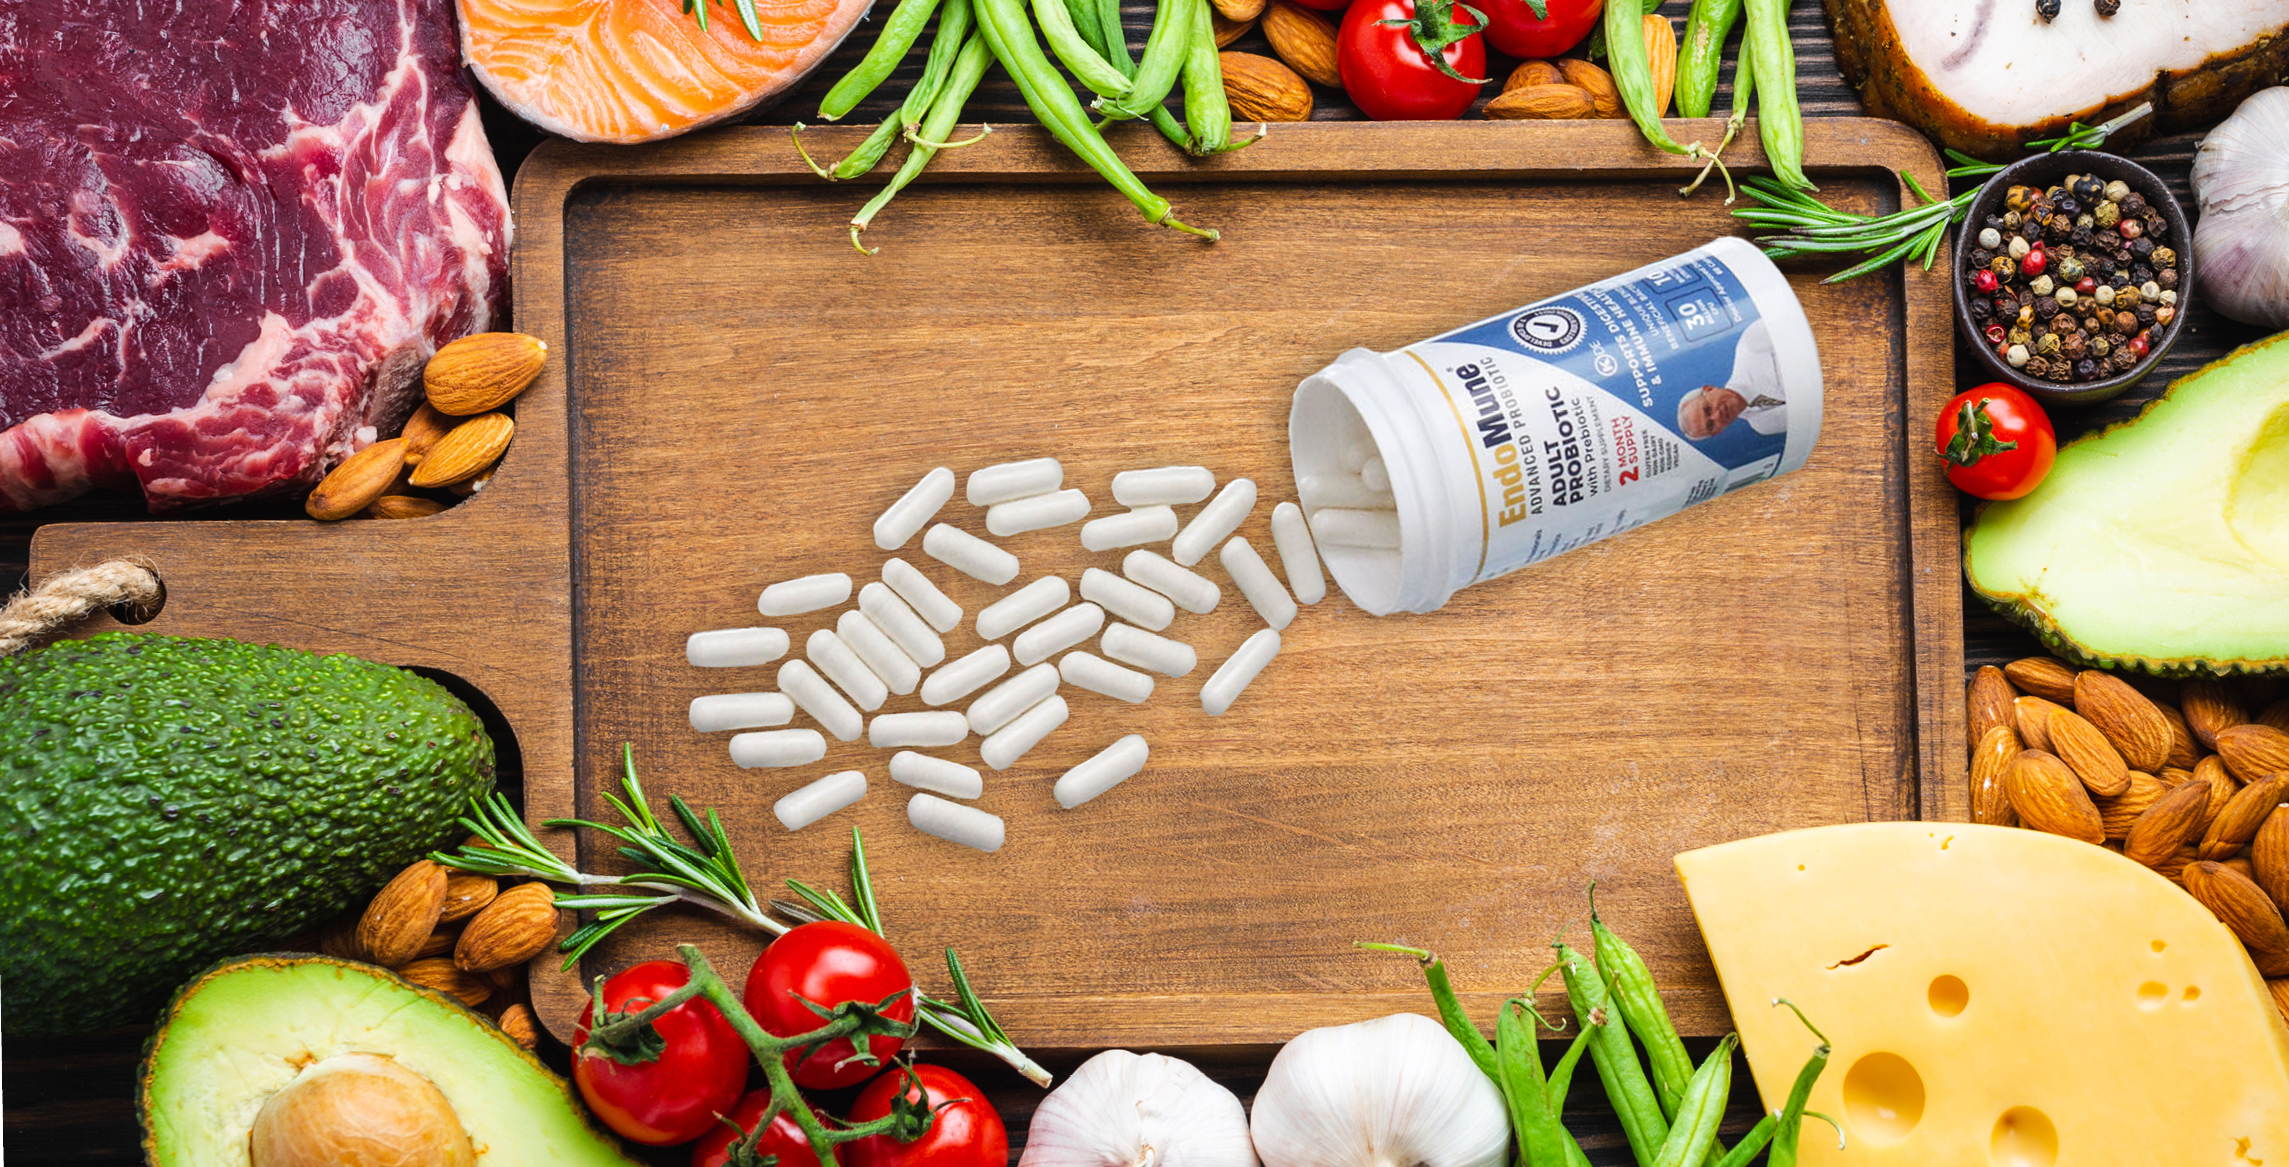 EndoMune pills on a cutting board, surrounded by various fresh vegetables